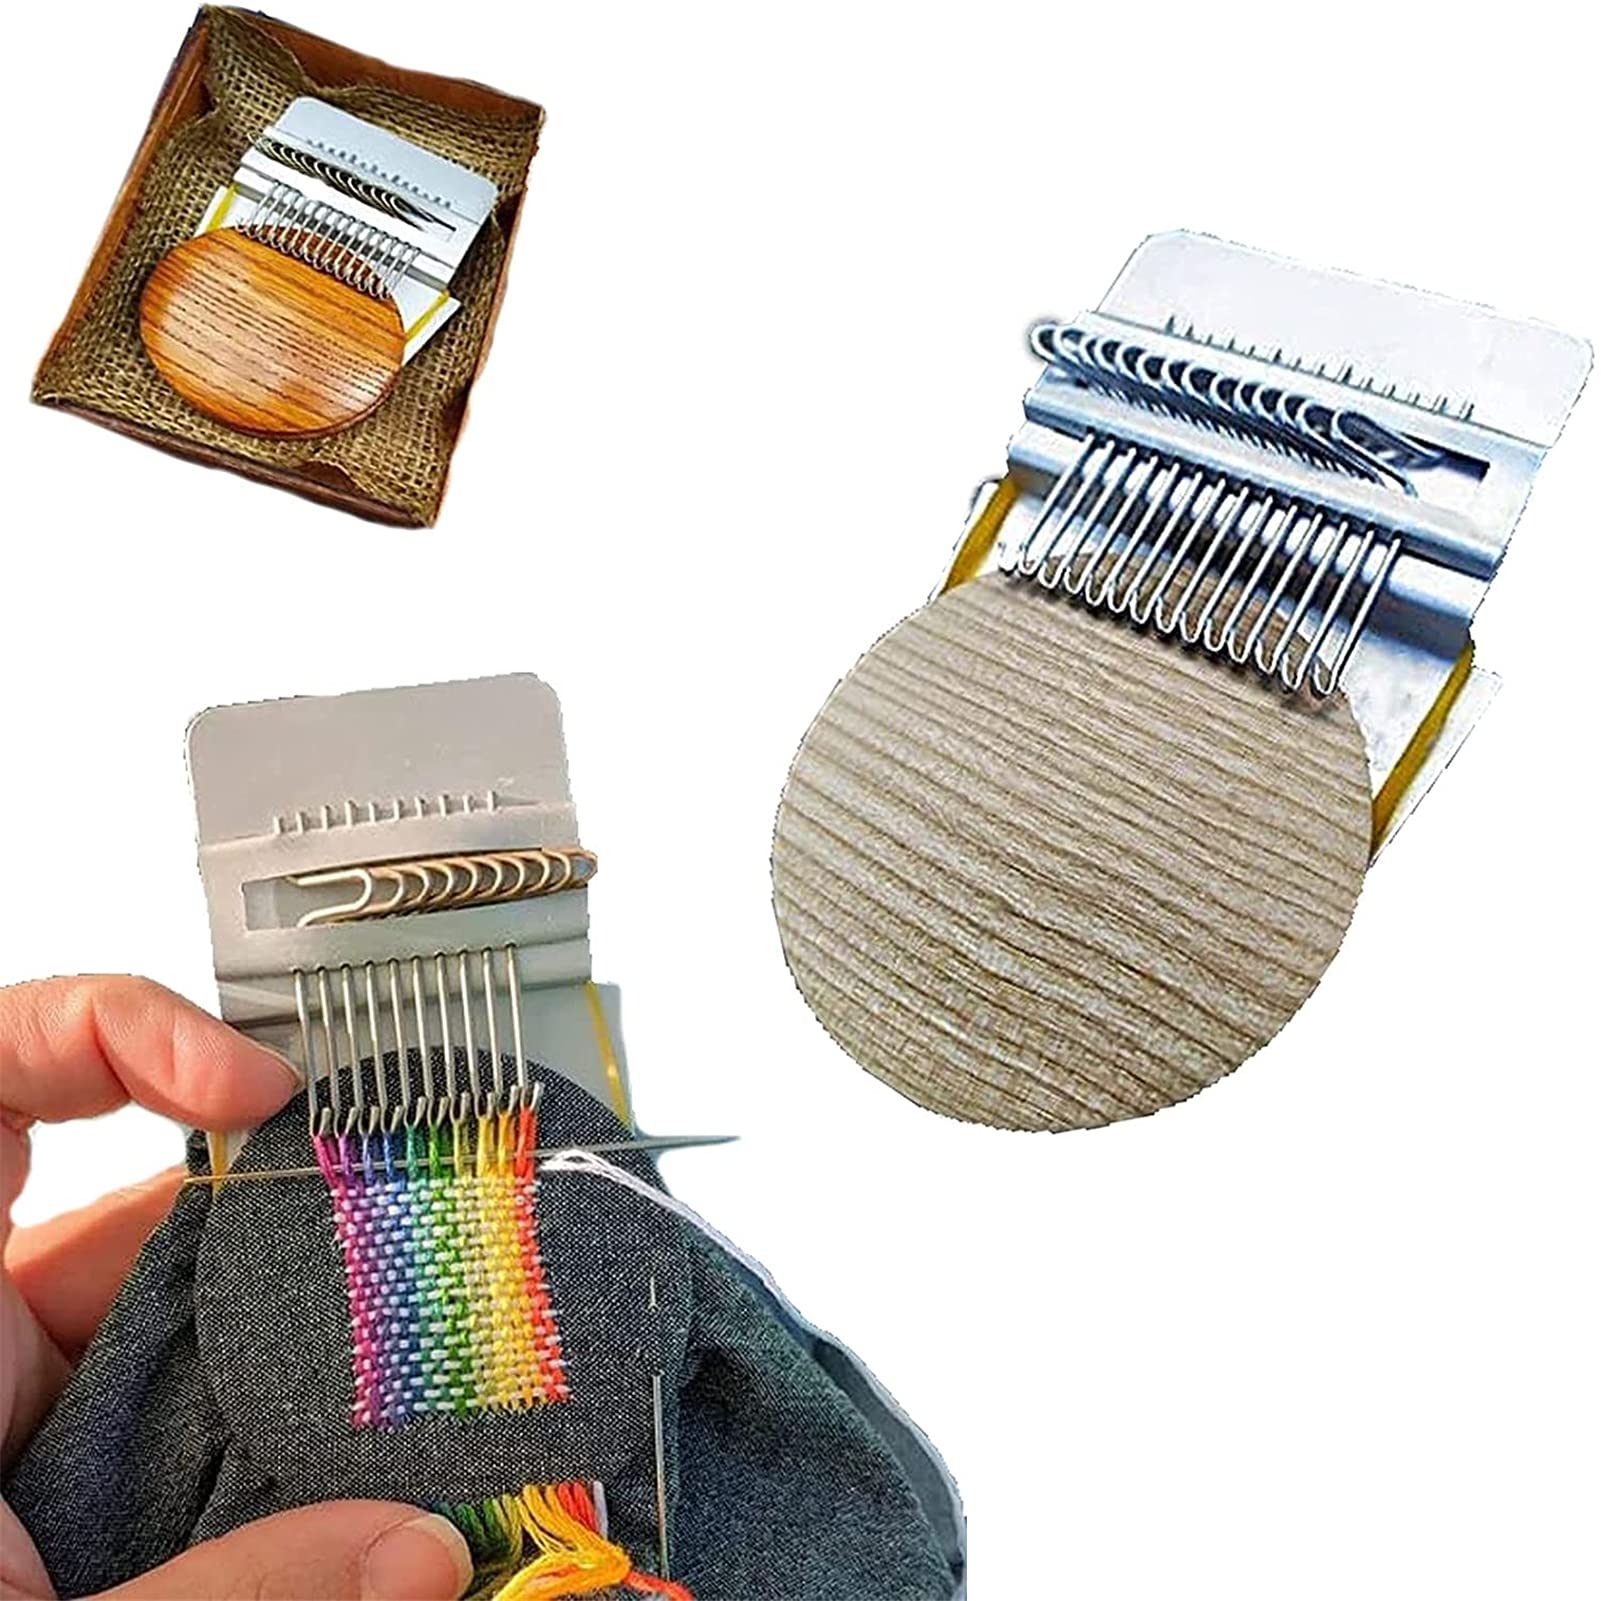 Speedweve Type Can Be Mended Clothes and Jeans Quickly 14 Hooks Small Loom Darning Tool Darning Machine Loom Small Loom-speedweve Type Weave Tool 